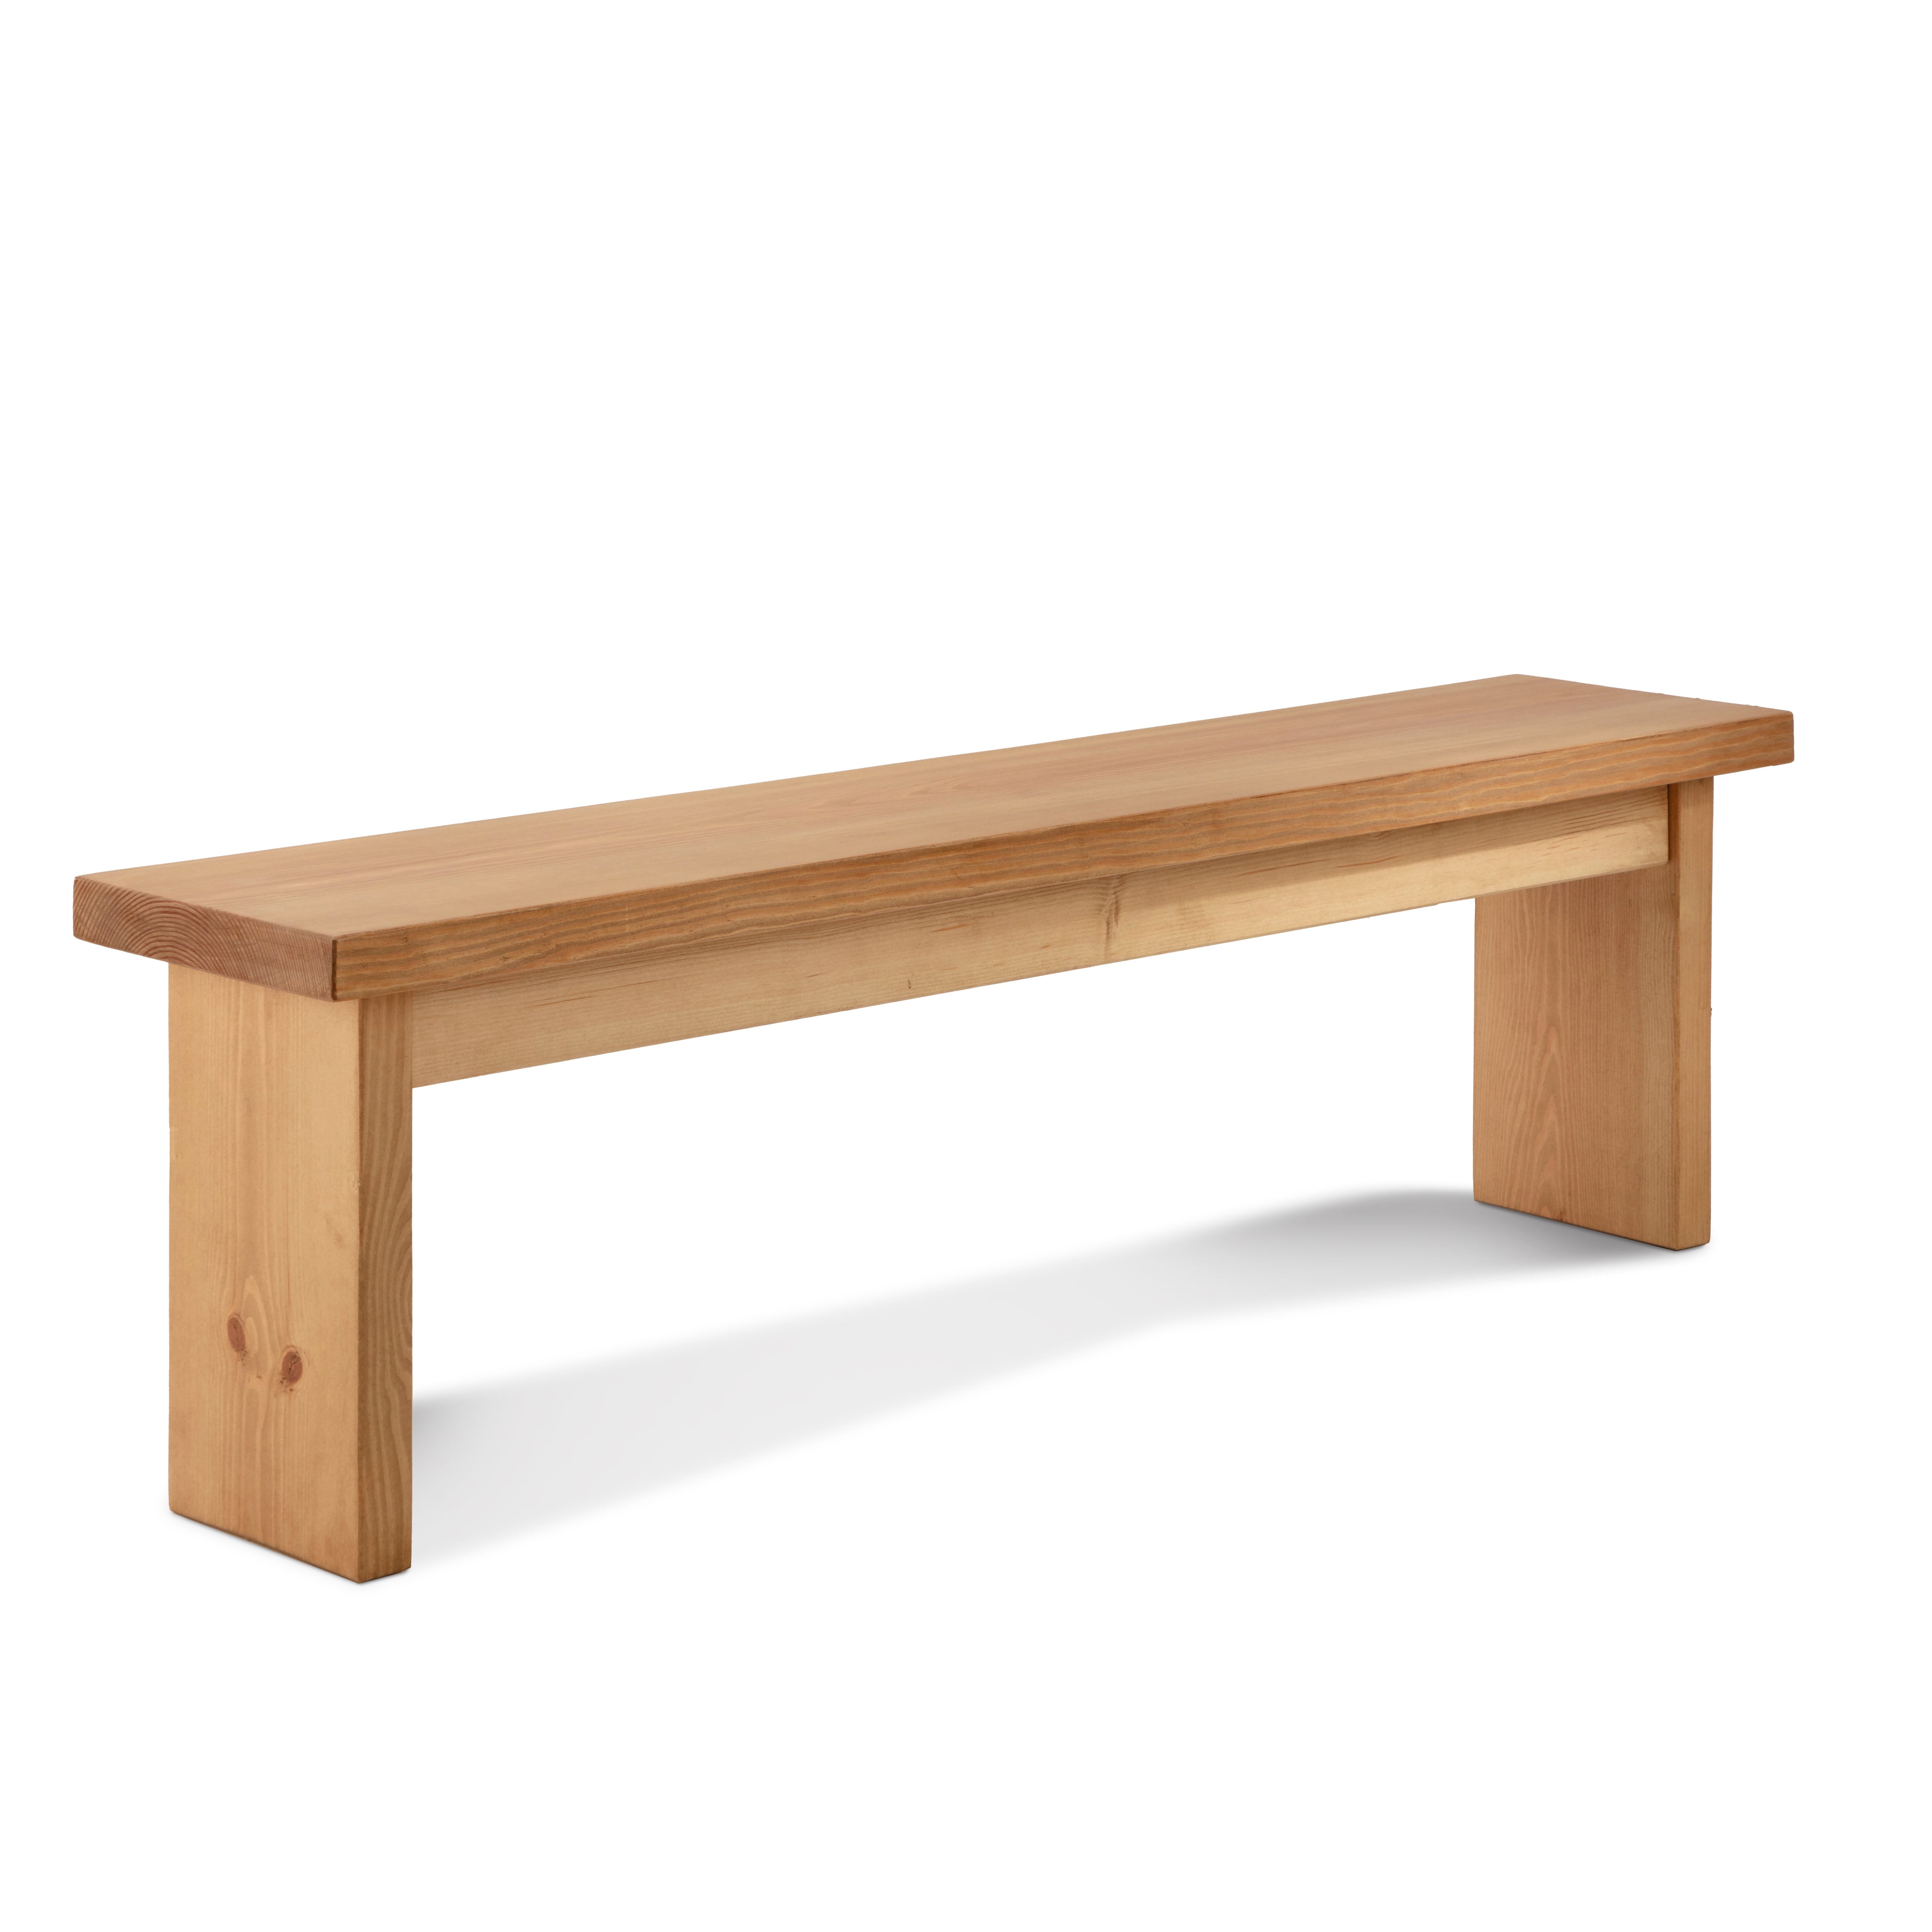 Wylam Dining Table And Benches